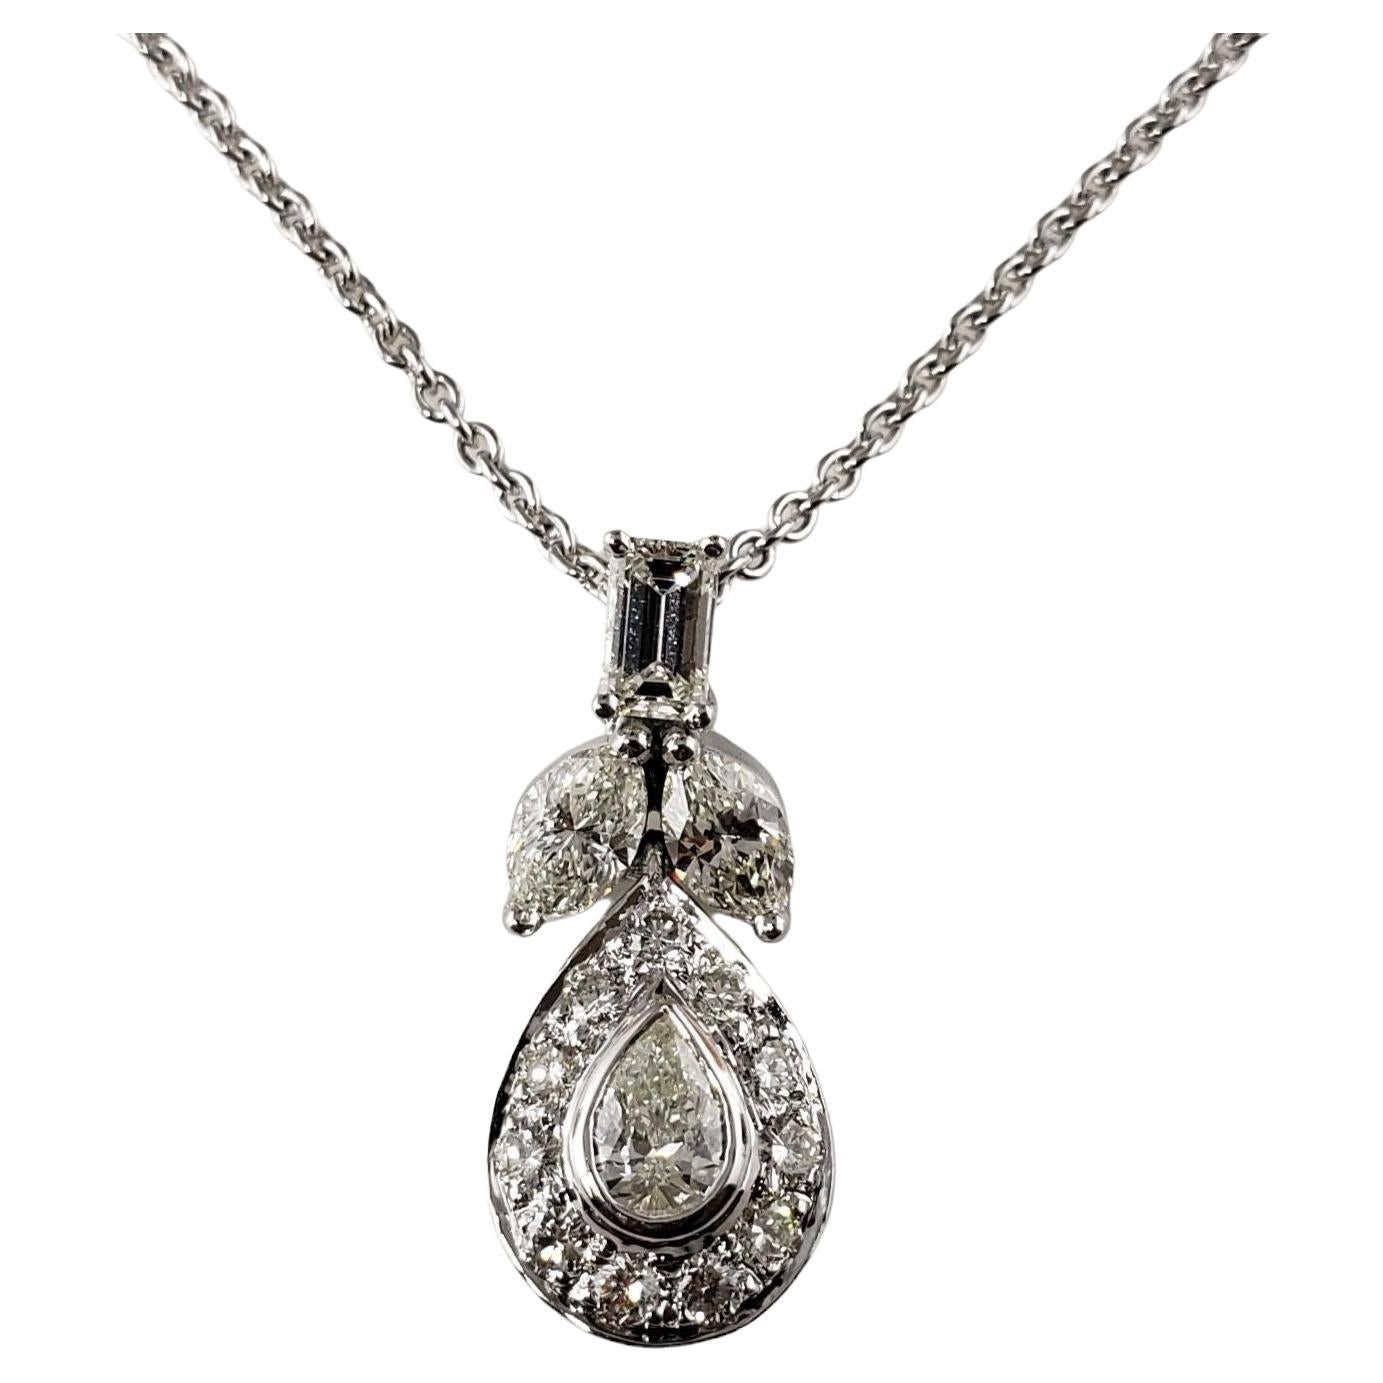  18 Karat White Gold and Diamond Pendant Necklace #14904 For Sale